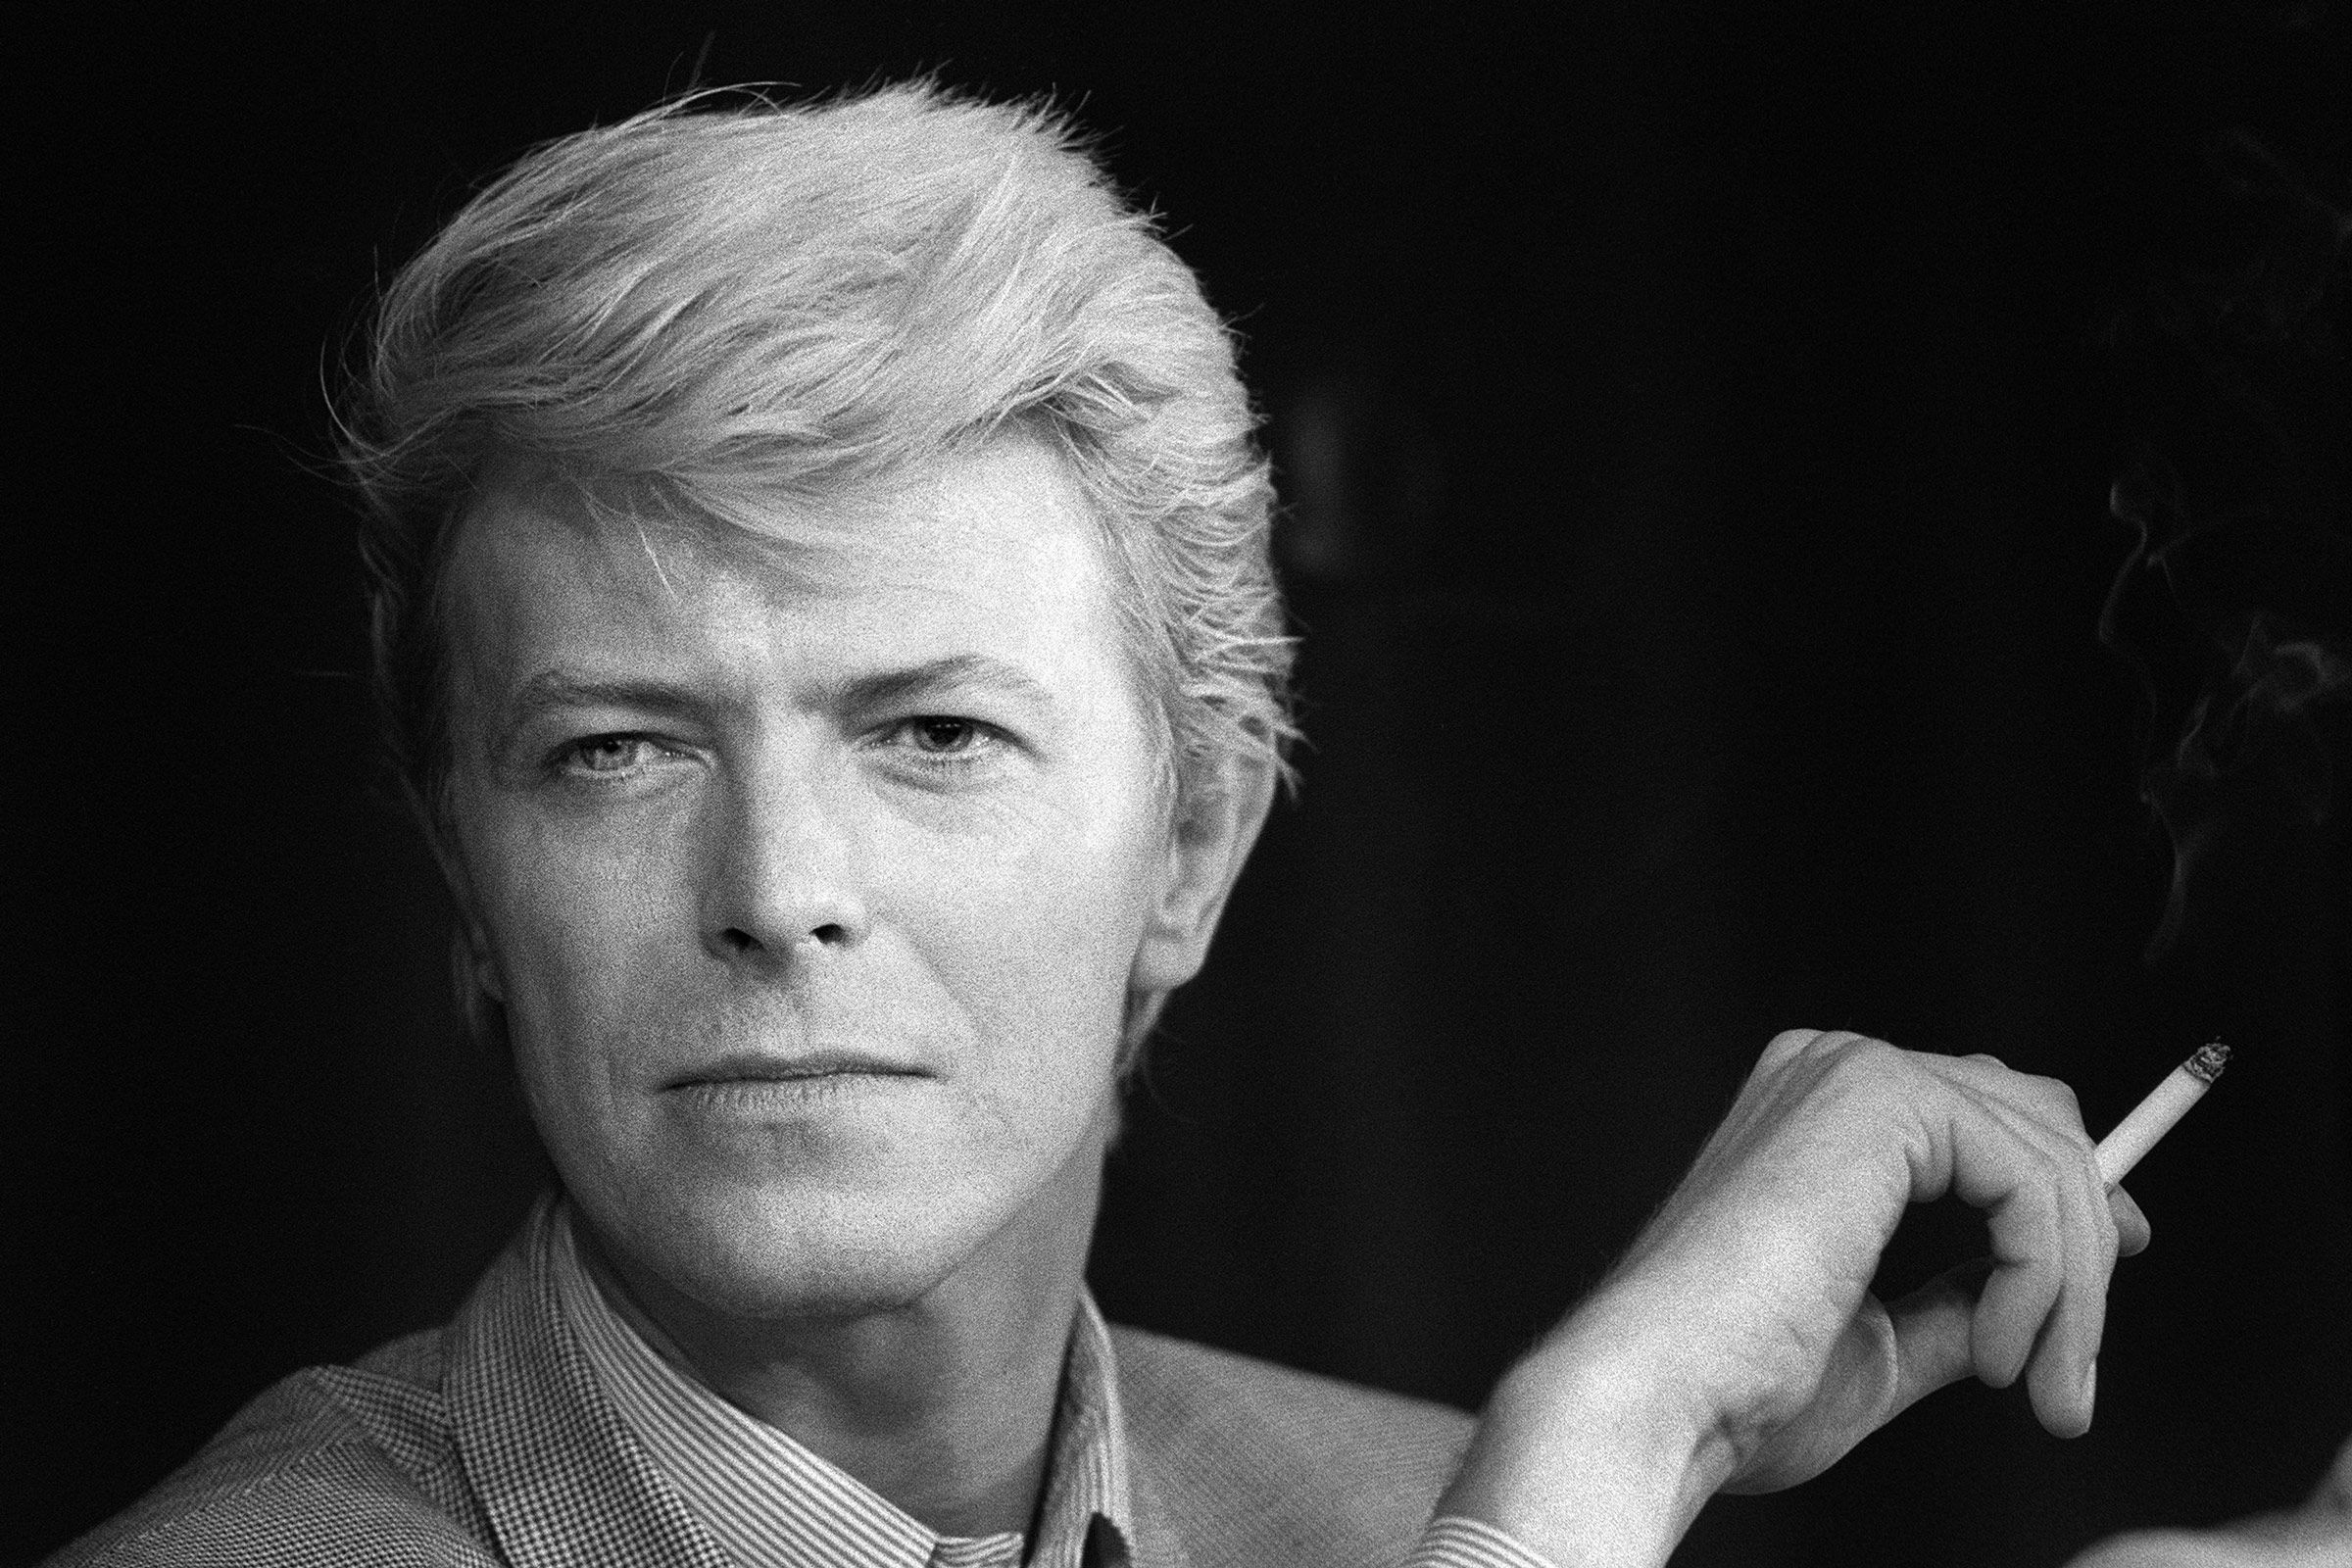 David Bowie, cultural pioneer, struck chord in Seattle music | The